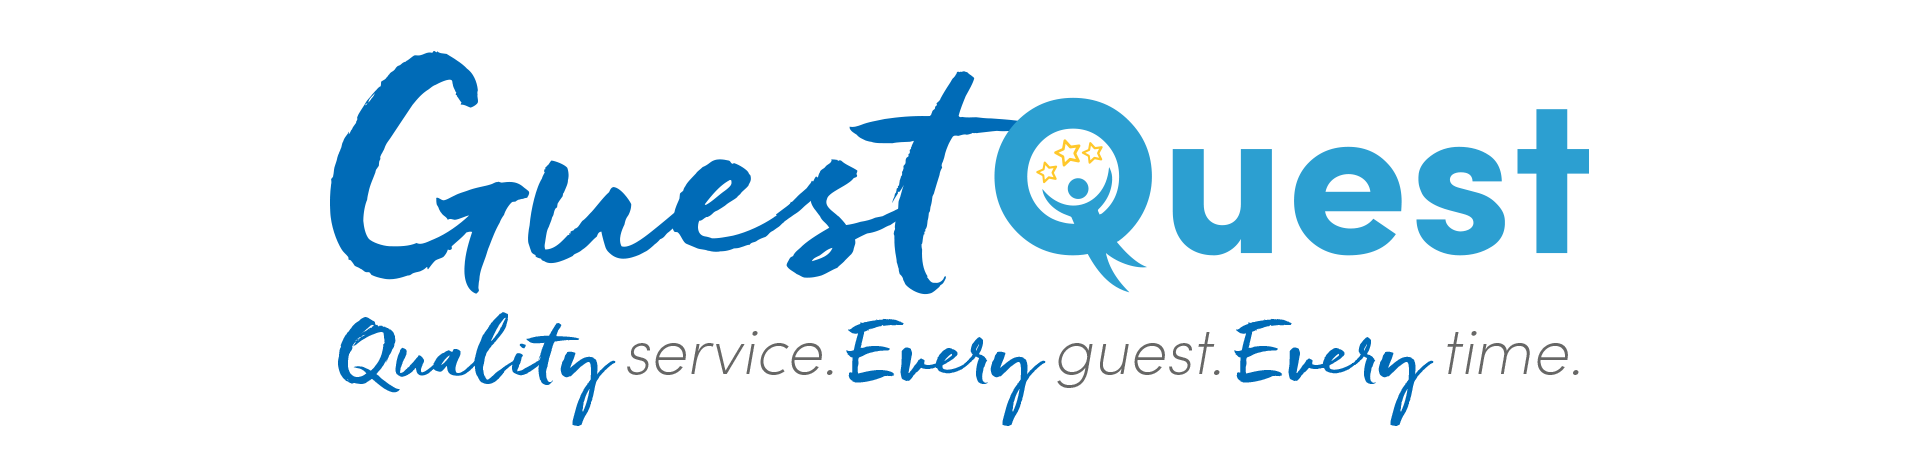 Guest Quest - Quality service, every guest, every time.